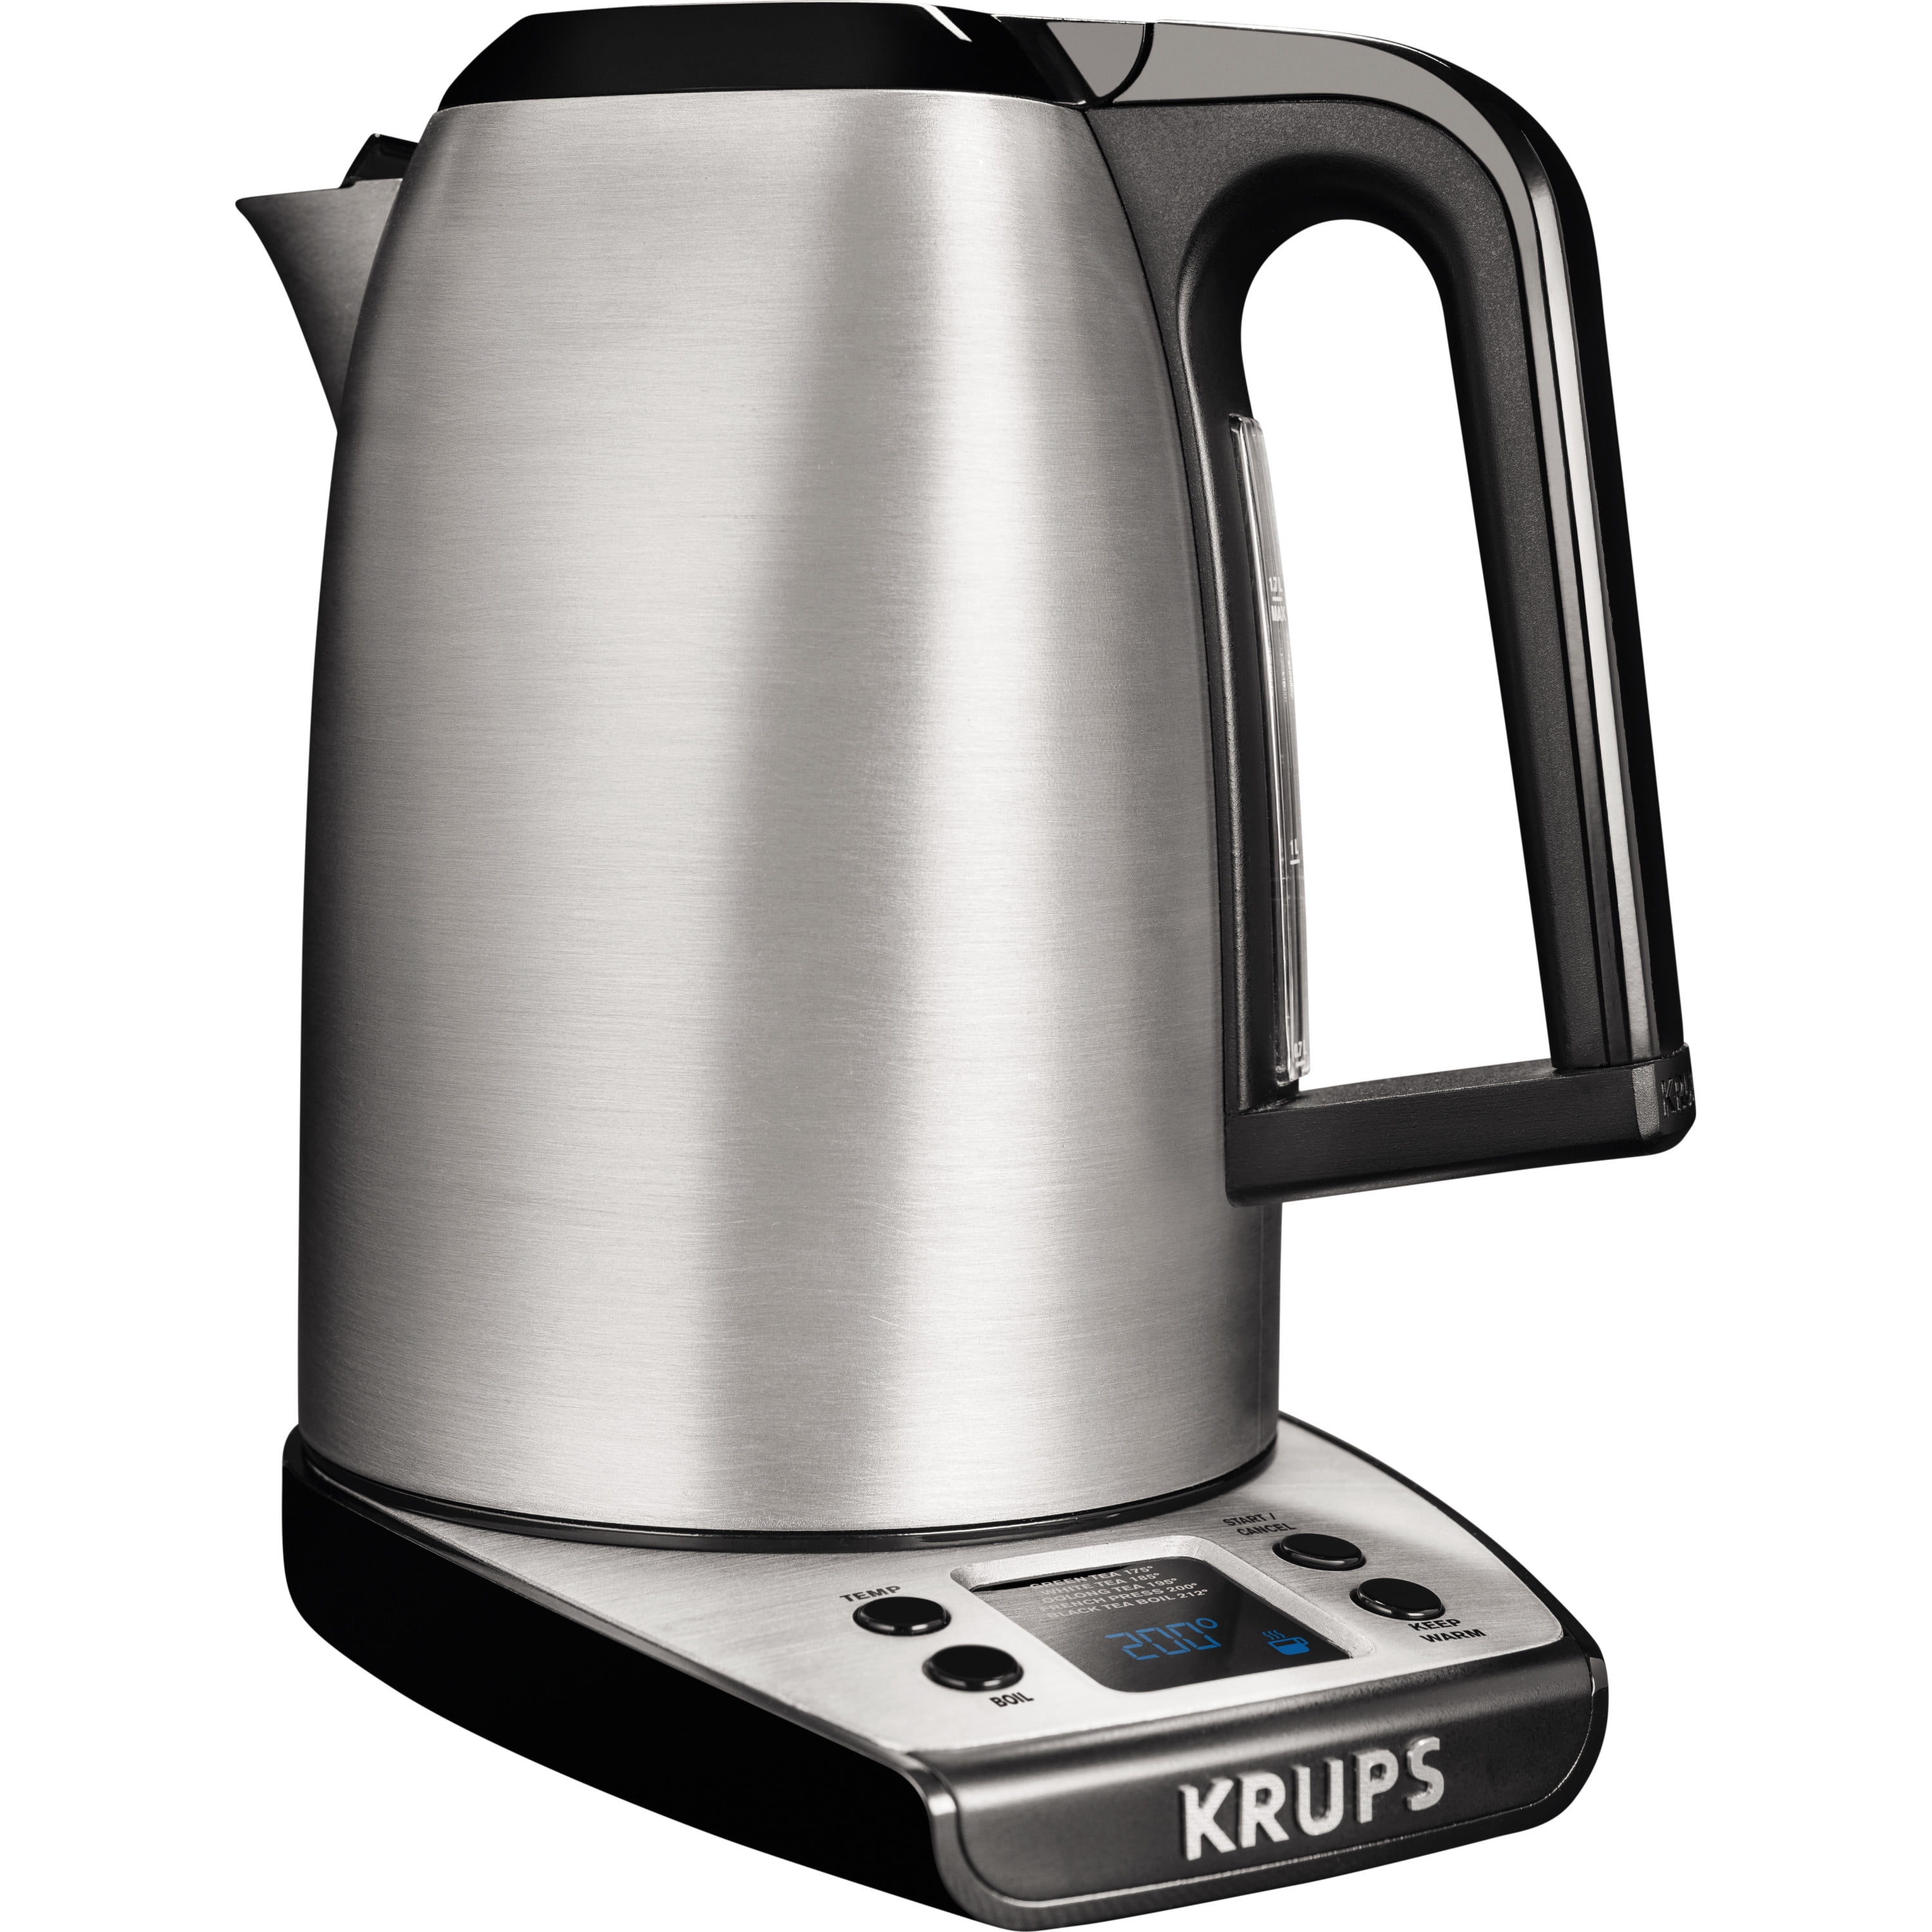 Silver KRUPS BW442D Control Line Electric Kettle with Auto Shut Off and Stainless steel Housing 1.7-Liter